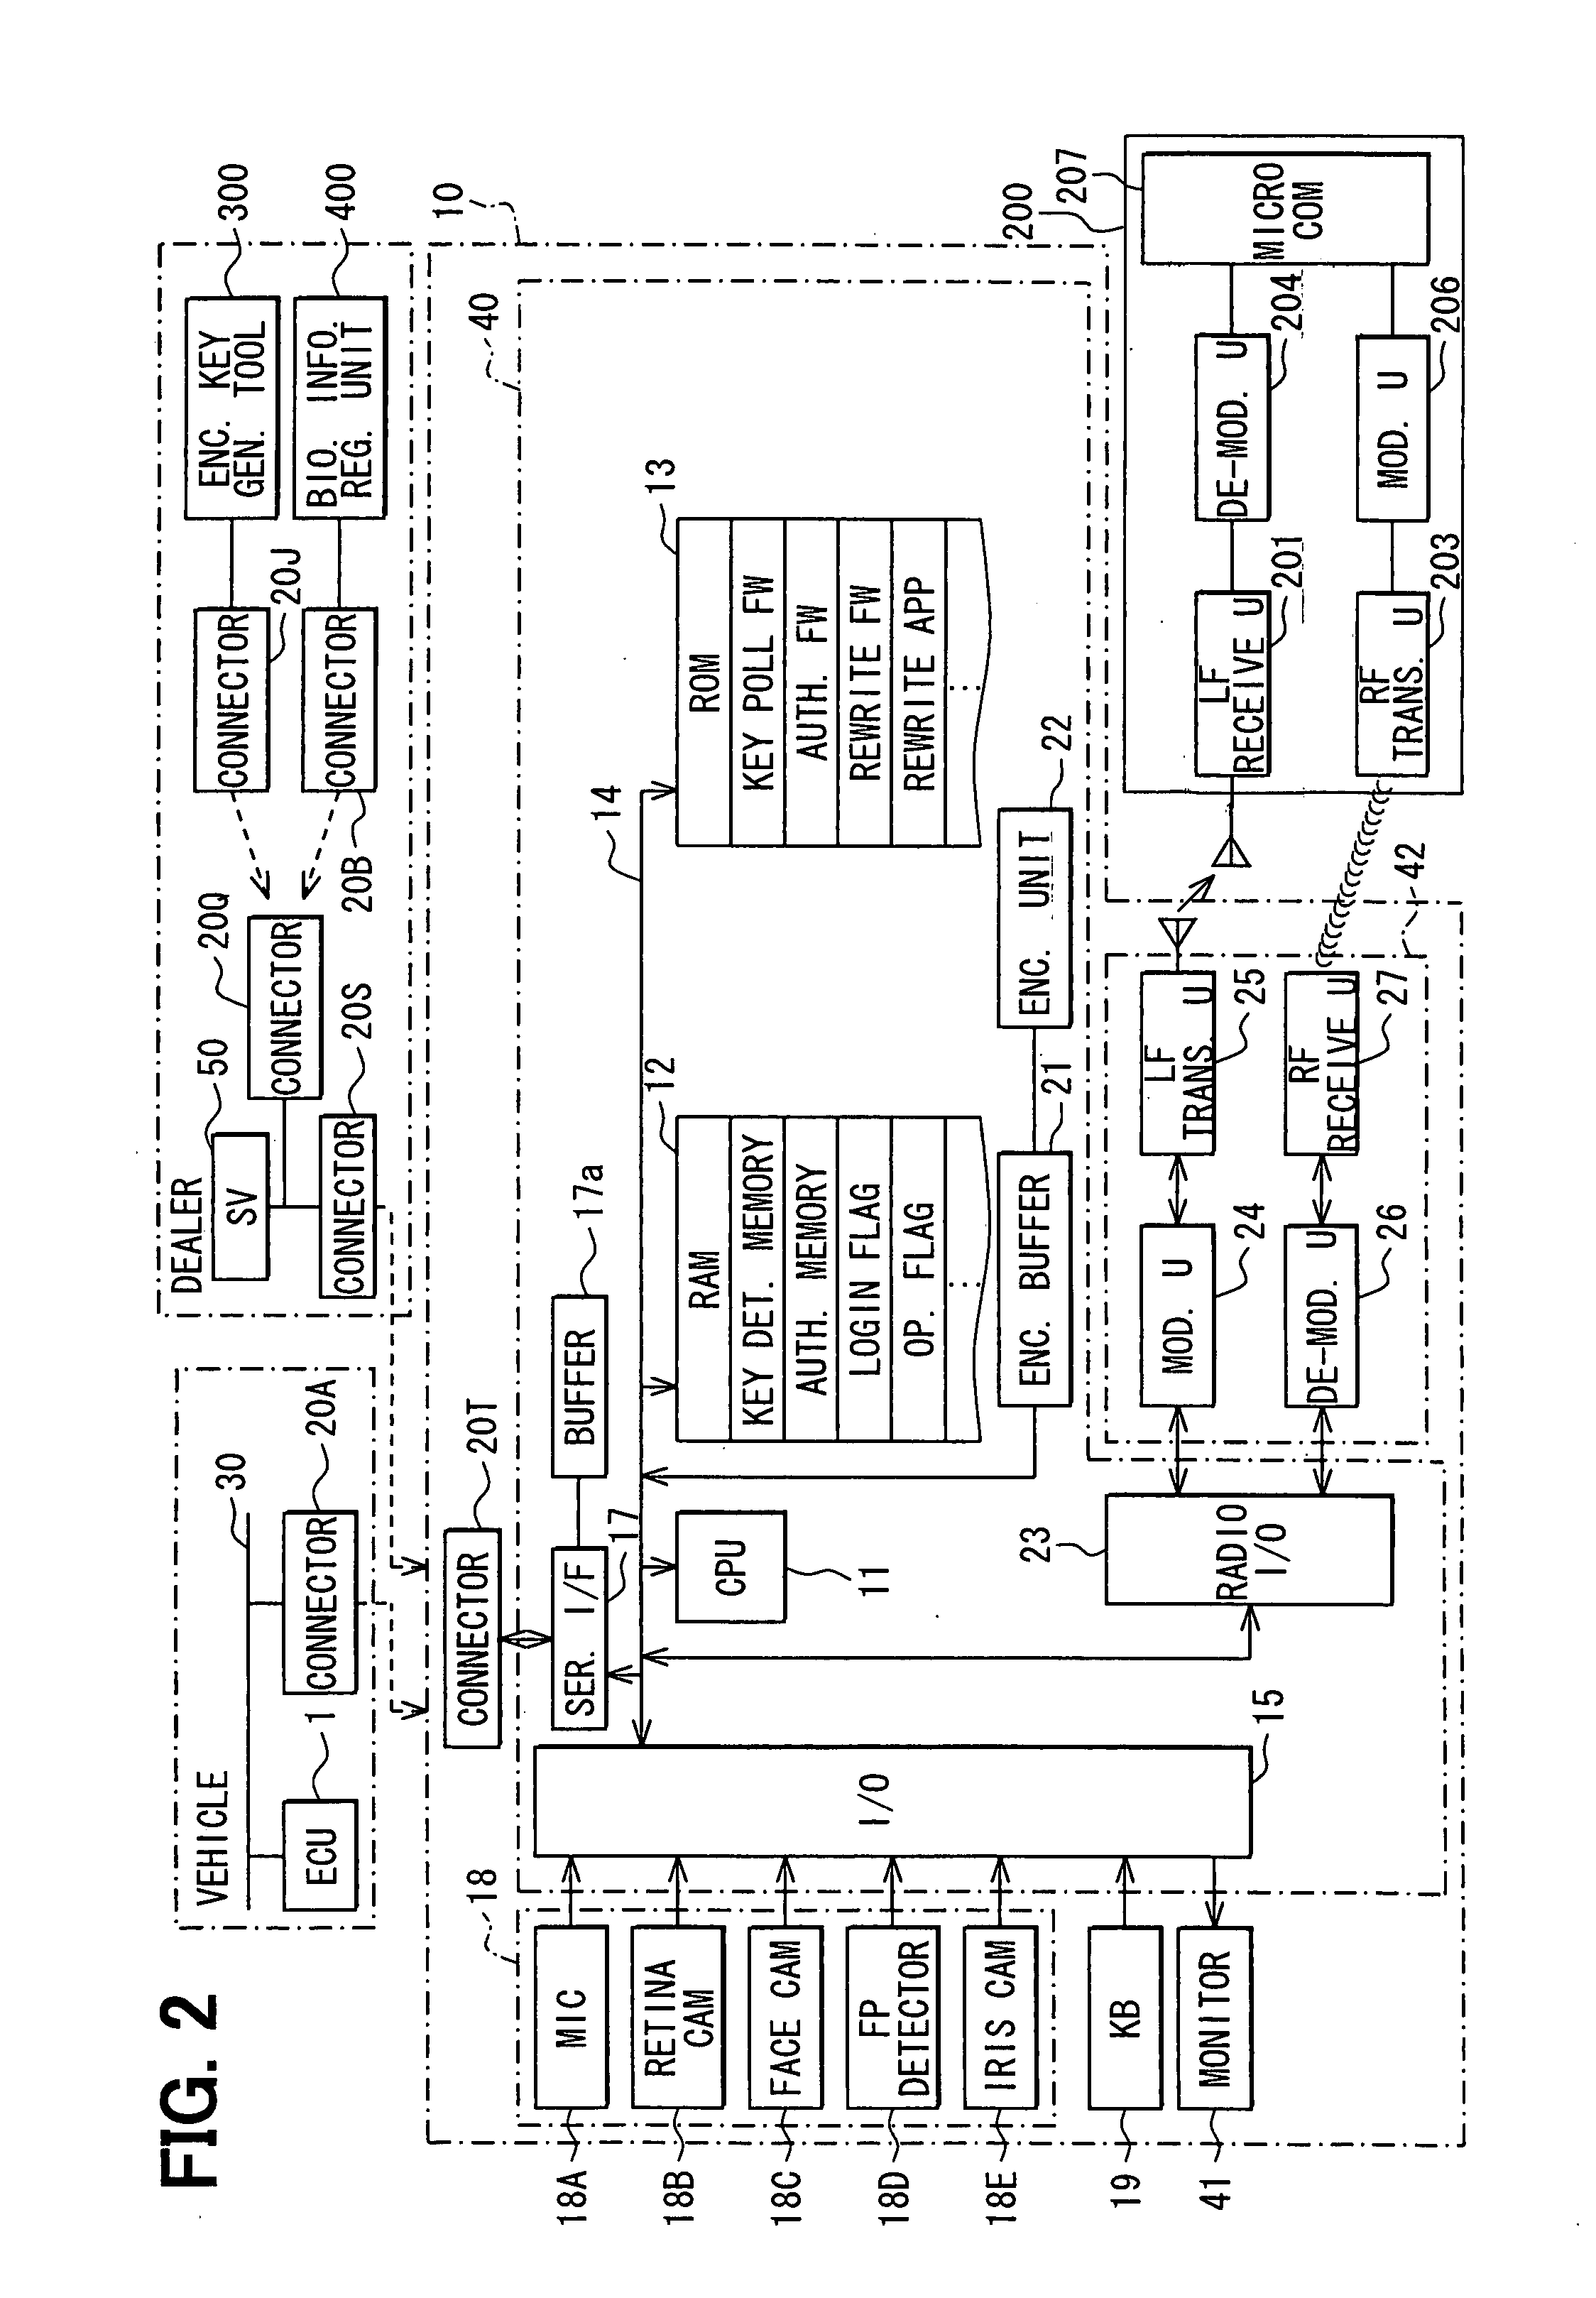 Vehicle information rewriting system